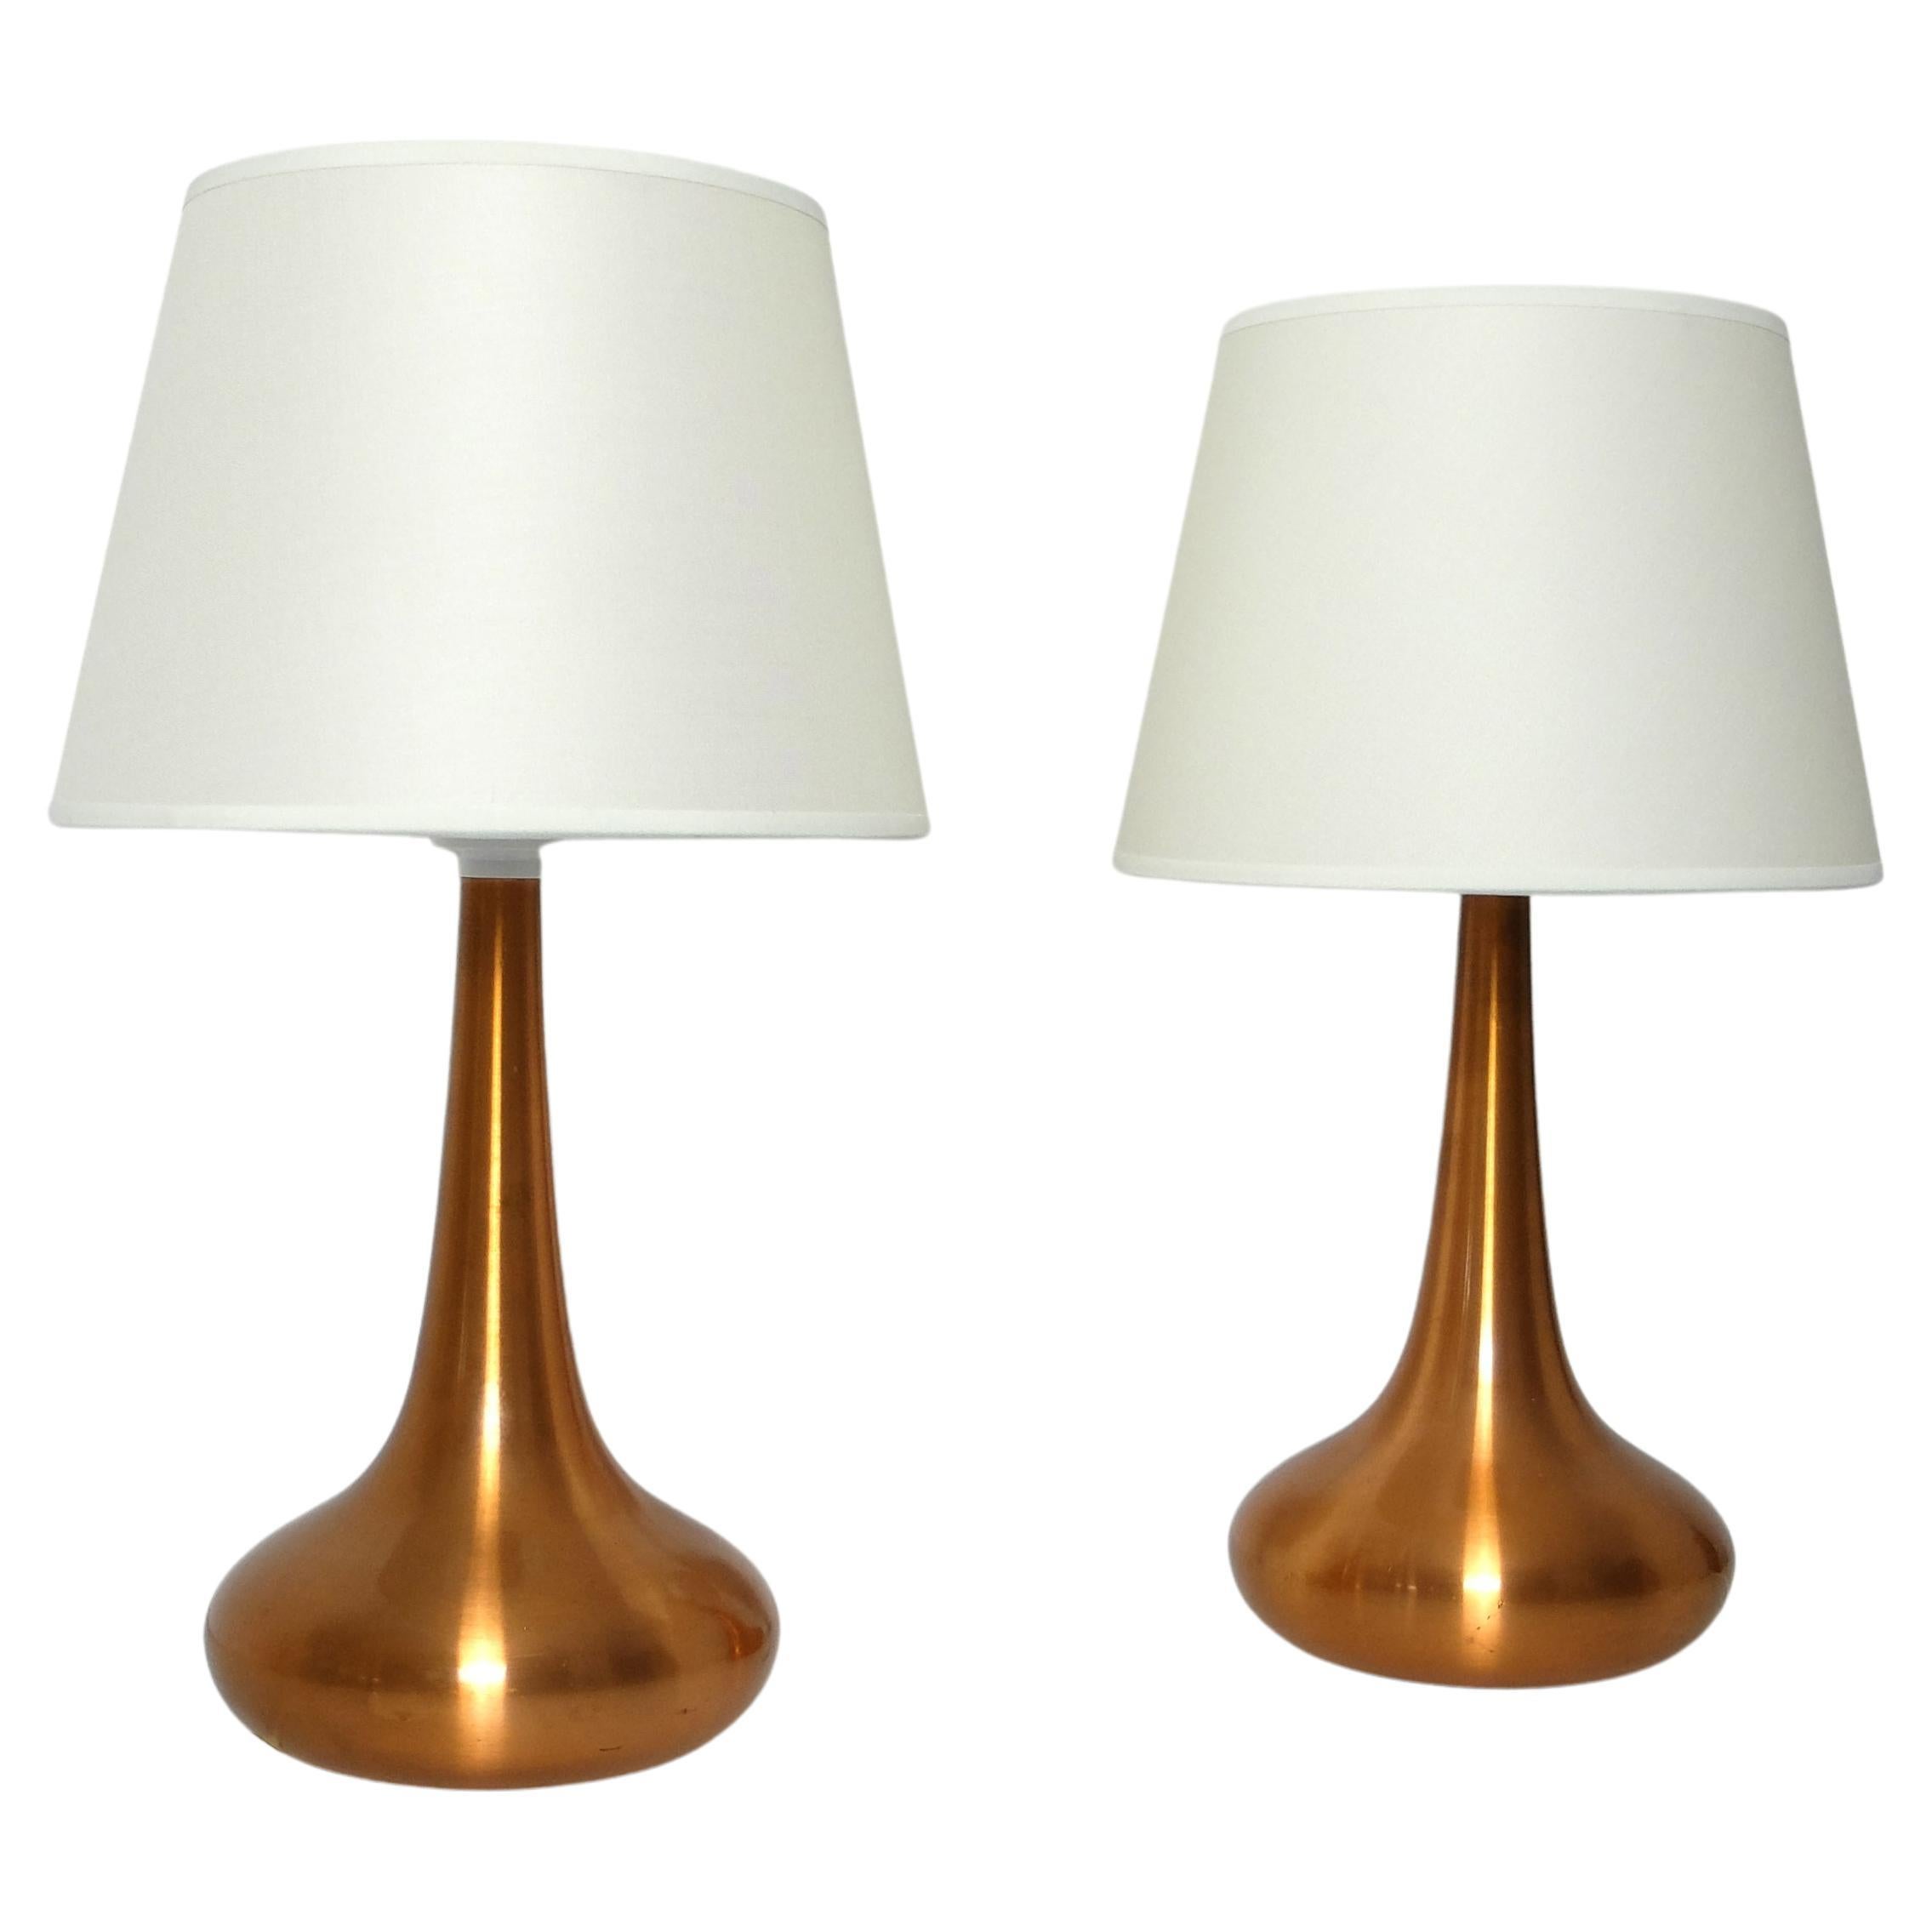 Pair of Danish Orient Table Lamps in Copper by Jo Hammerborg, Fog & Mørup, 1960s For Sale